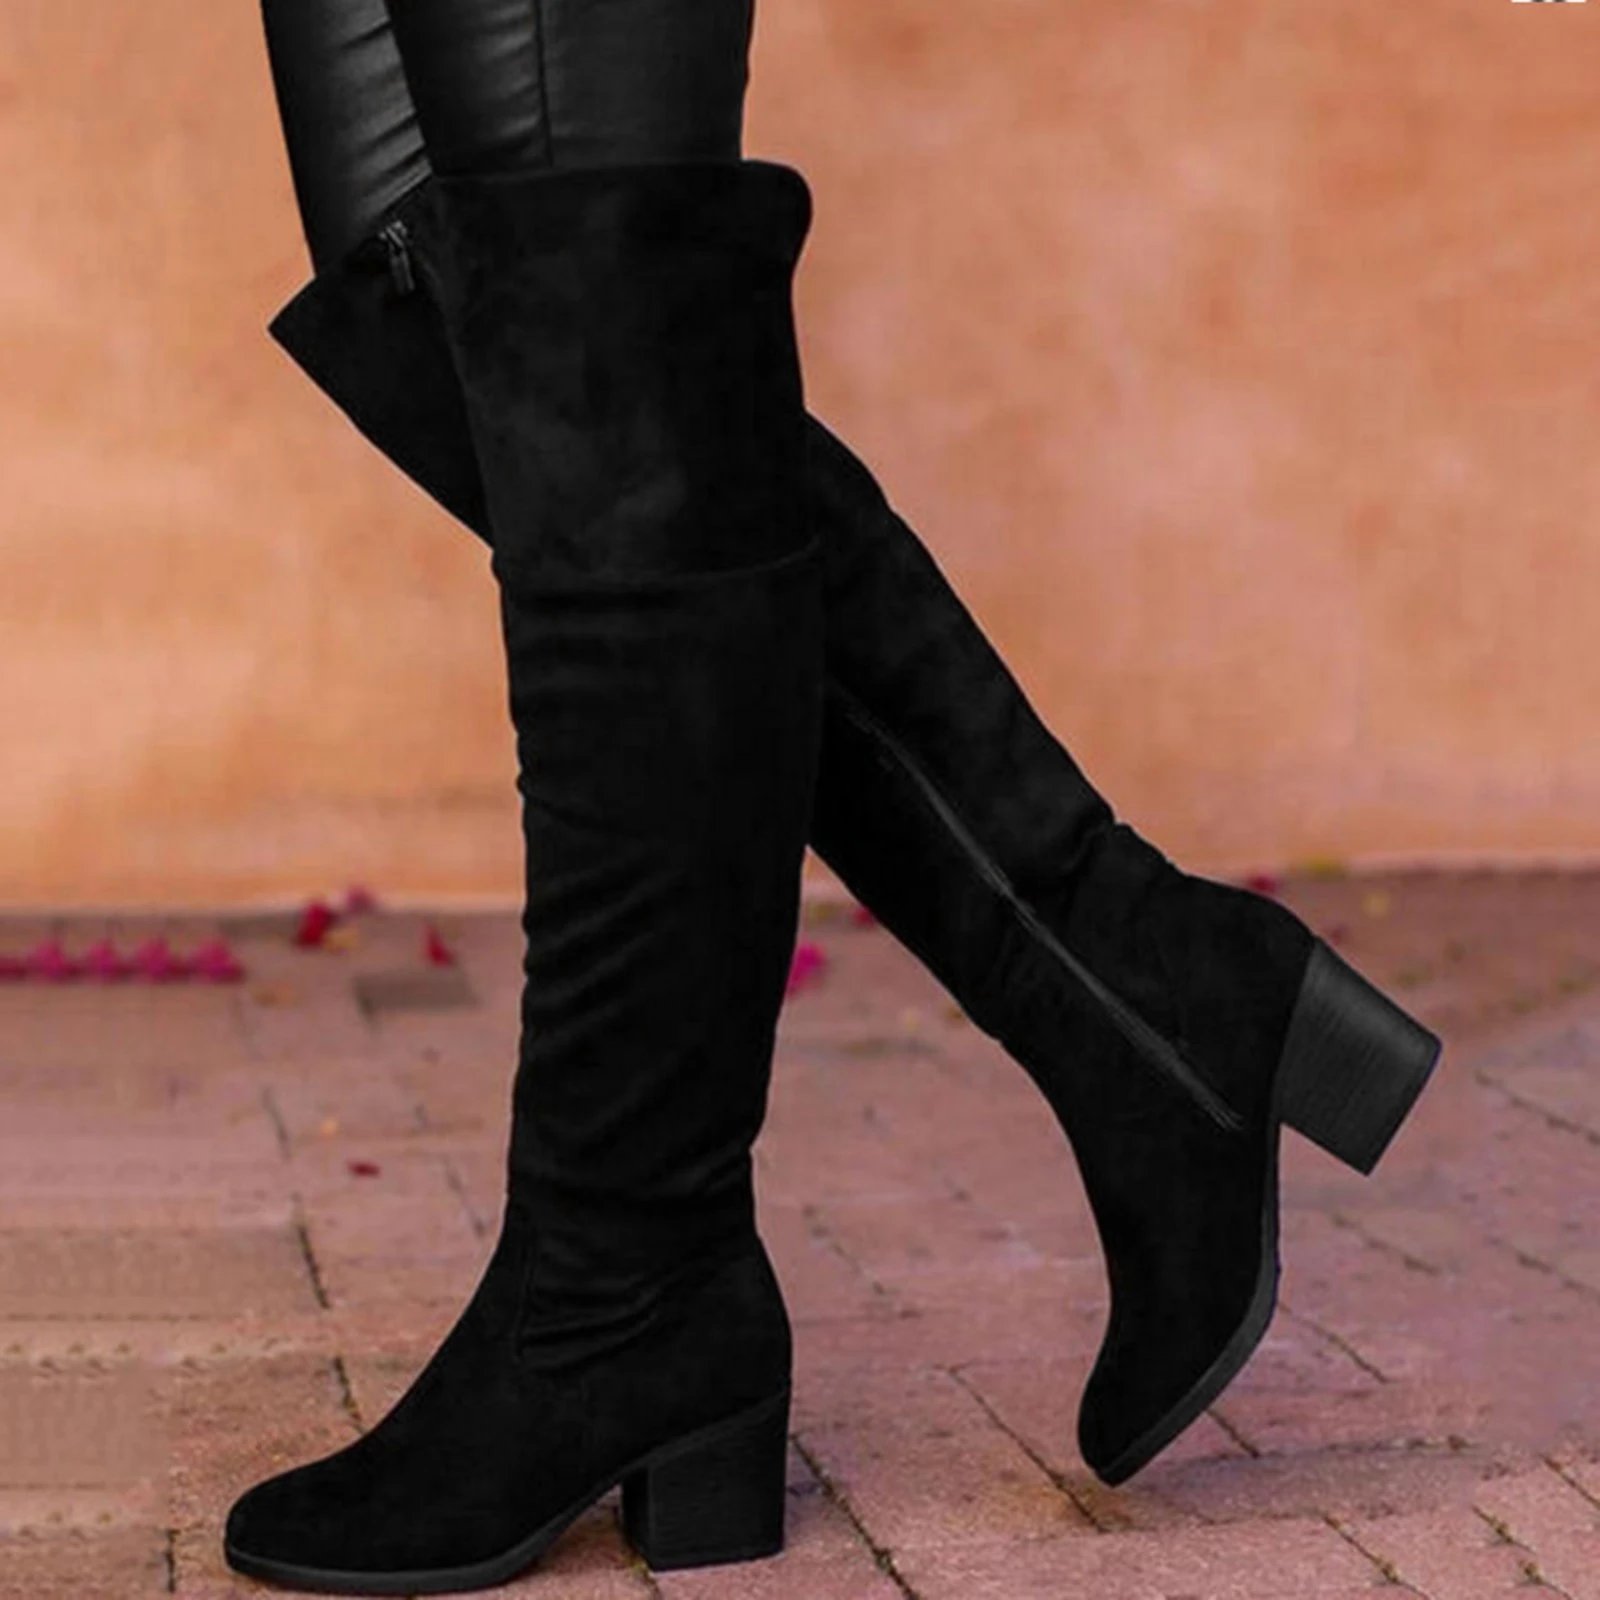 dessert Monarchy Fore type Women Boots Winter Over The Knee Boots Long Boots Comfort Shoes Chunky High  Heels Pure Color Retro Thigh Boots Женские сапоги|Knee-High Boots| -  AliExpress